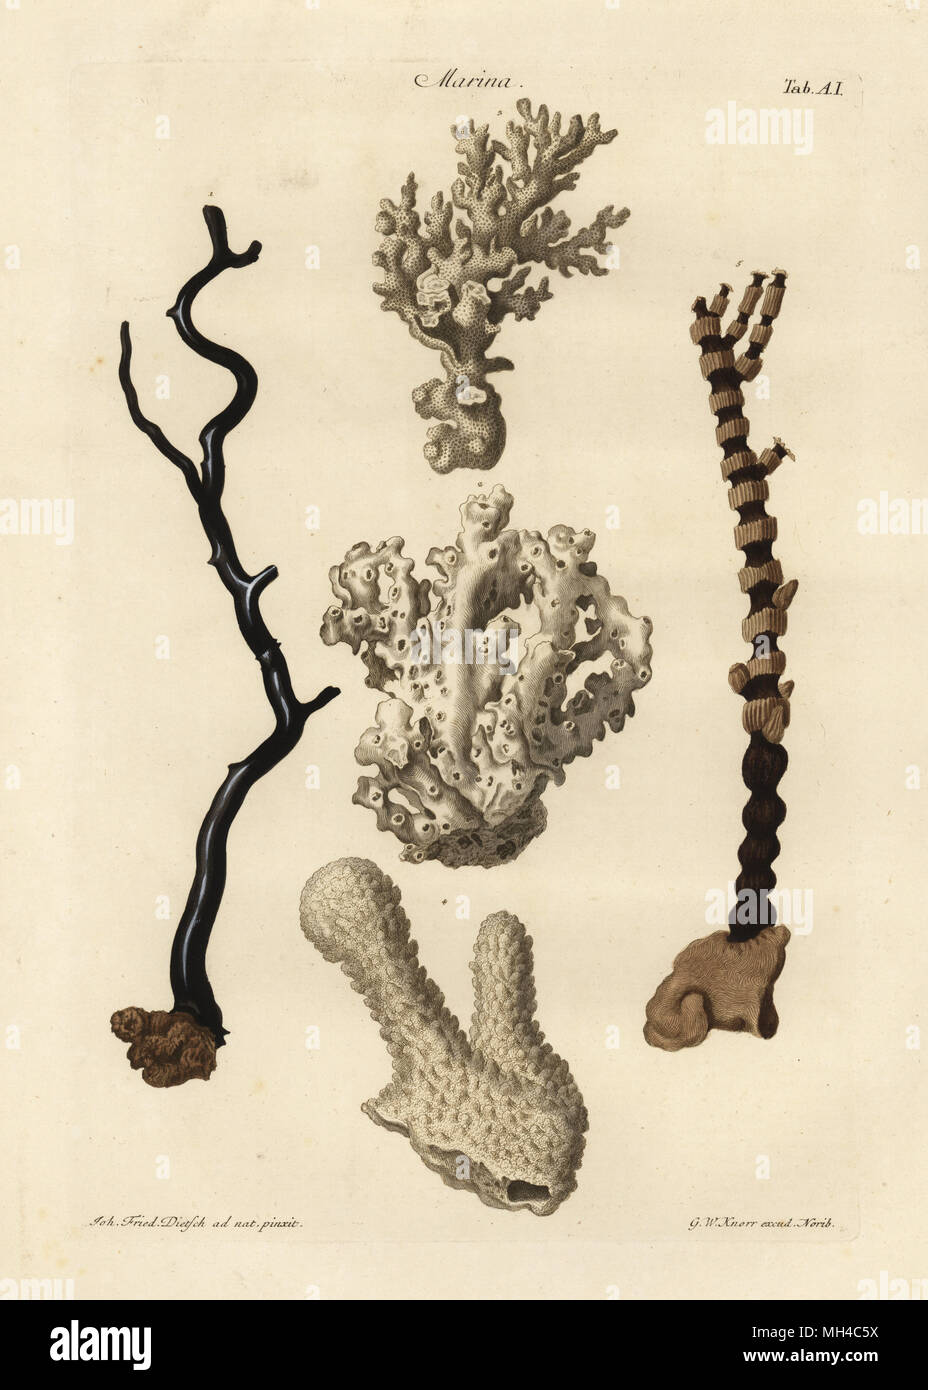 Coral species: black coral, Corallium nigrum arboreum 1, Corallium album stellatum 2, Corallium album oculatum 3, Acropora abrotanoides, Madrepora abrotonoides 4, and bamboo coral, Isis hippuris 5. Handcoloured copperplate engraving by G.W. Knorr after an illustration by Johann Friedrich Dietsch from Georg Wolfgang Knorr's Deliciae Naturae Selectae of Kabinet van Zeldzaamheden der Natuur, Blusse and Son, Nuremberg, 1771. Specimens from a Wunderkammer or Cabinet of Curiosities owned by Dr. Christoph Jacob Trew in Nuremberg. Stock Photo